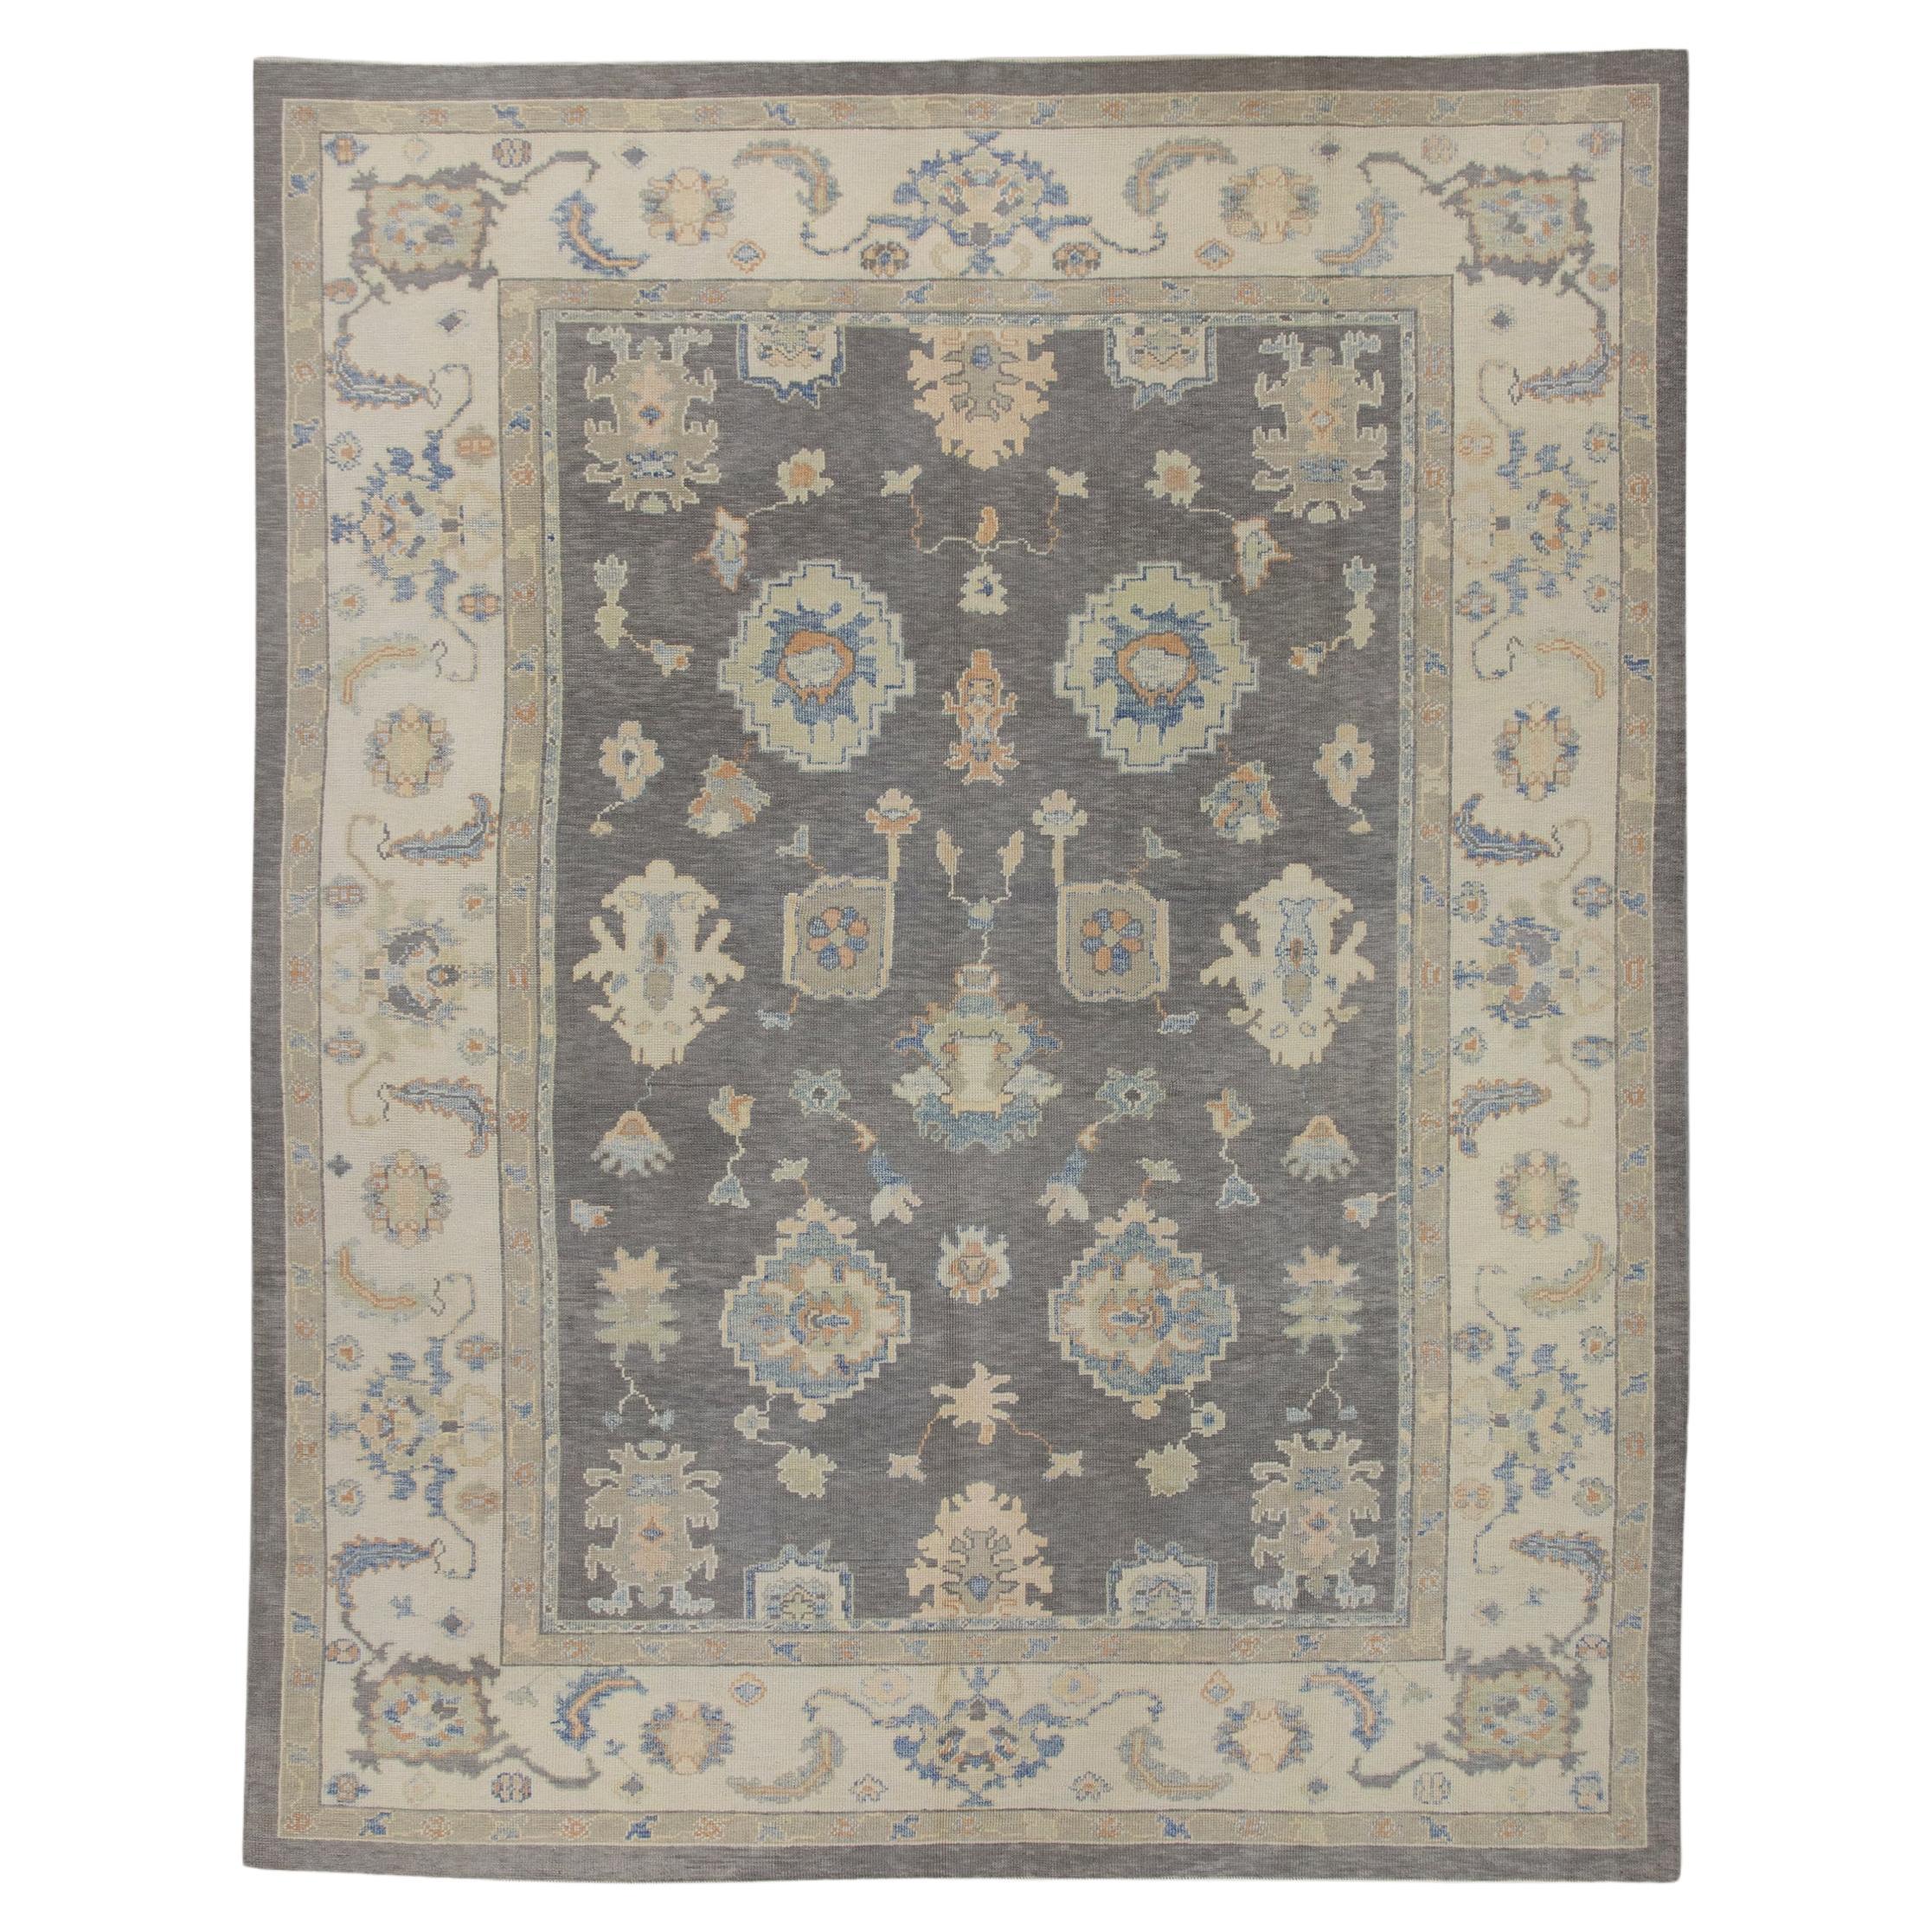 Oriental Hand Knotted Turkish Oushak Rug 9'2" x 11'10" #7215